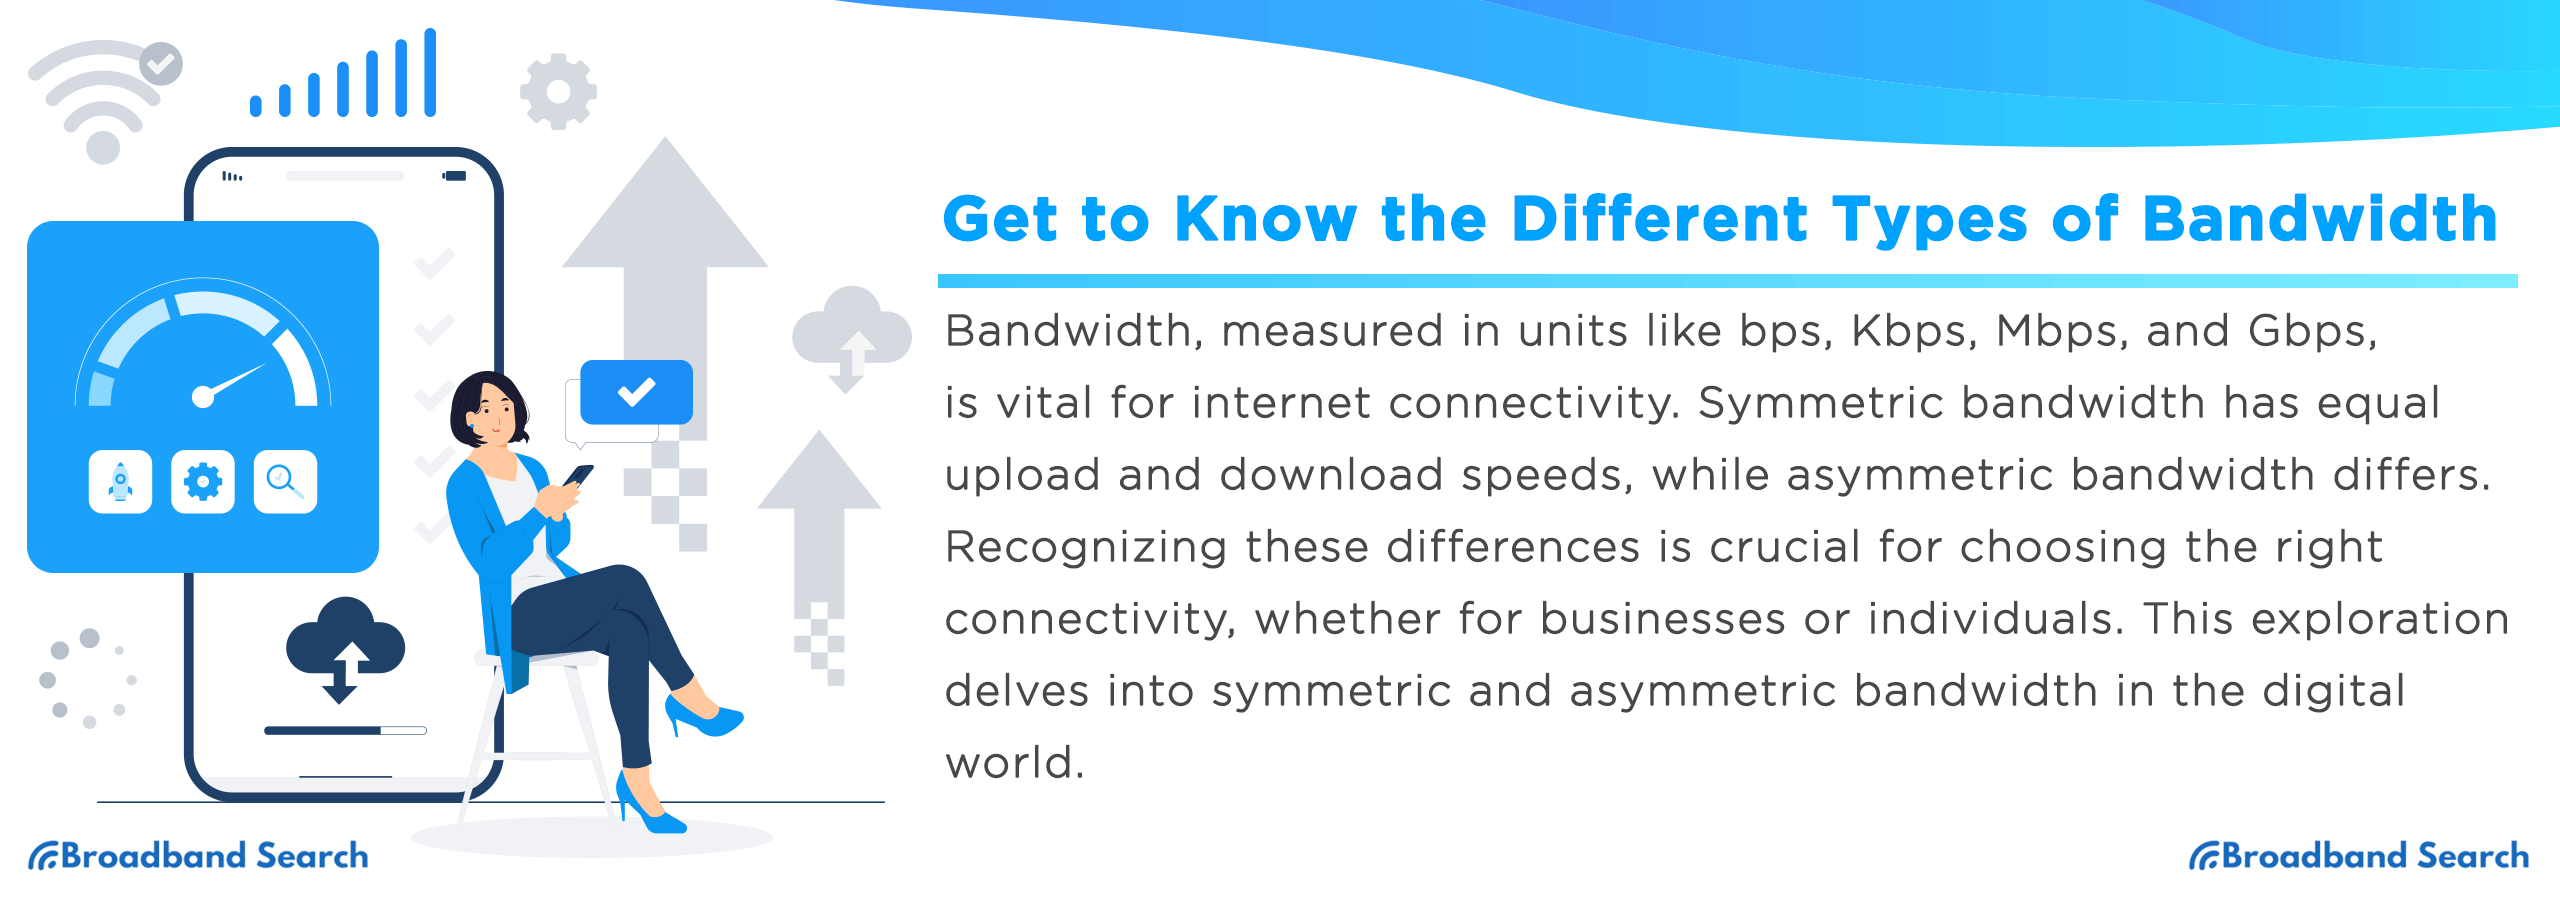 Get to Know the Different Types of Bandwidth